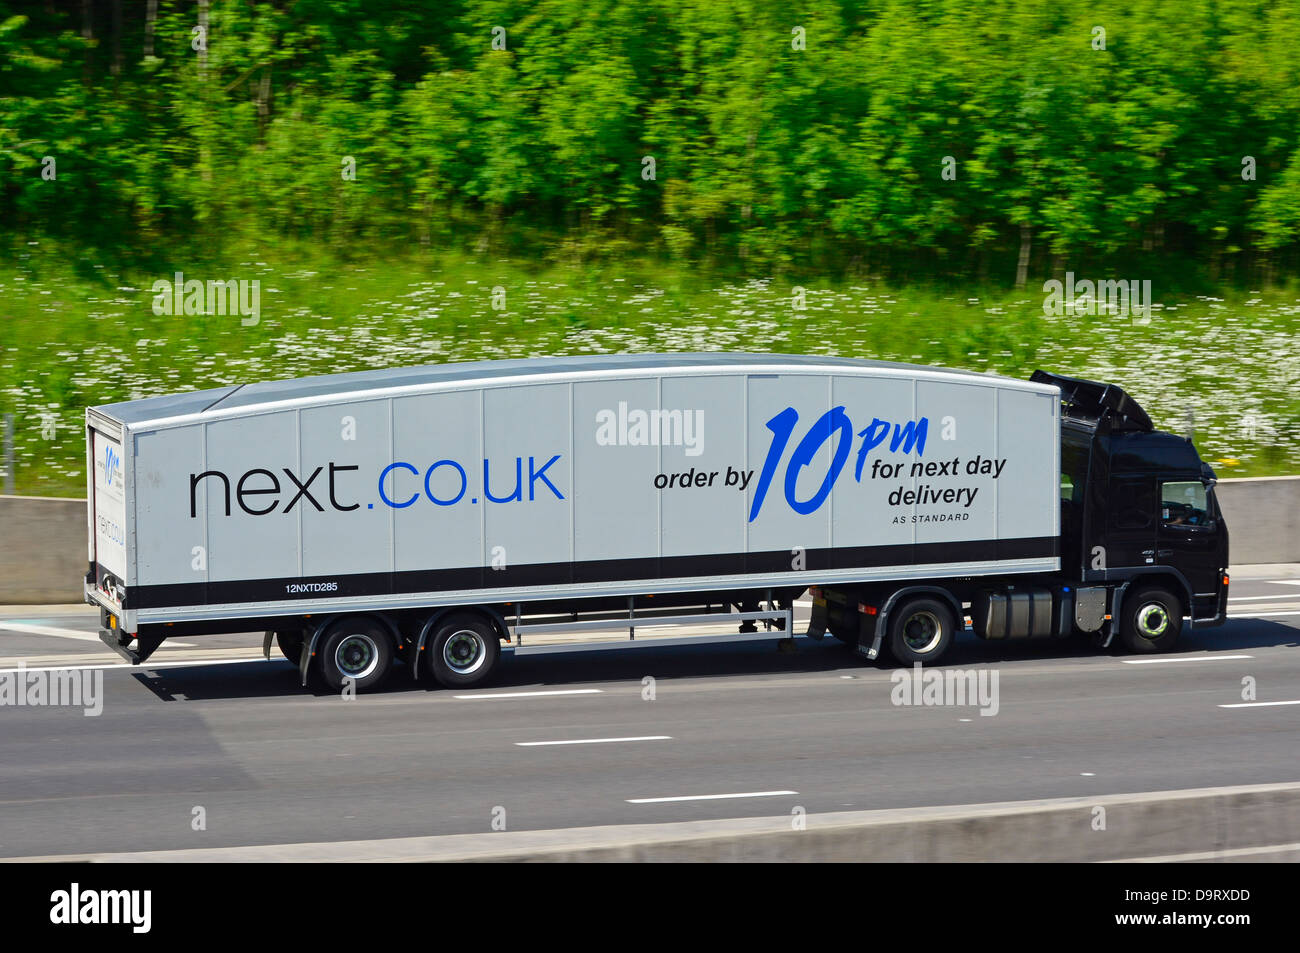 Articulated lorry and trailer with large advert promoting Next store online next day delivery service Stock Photo